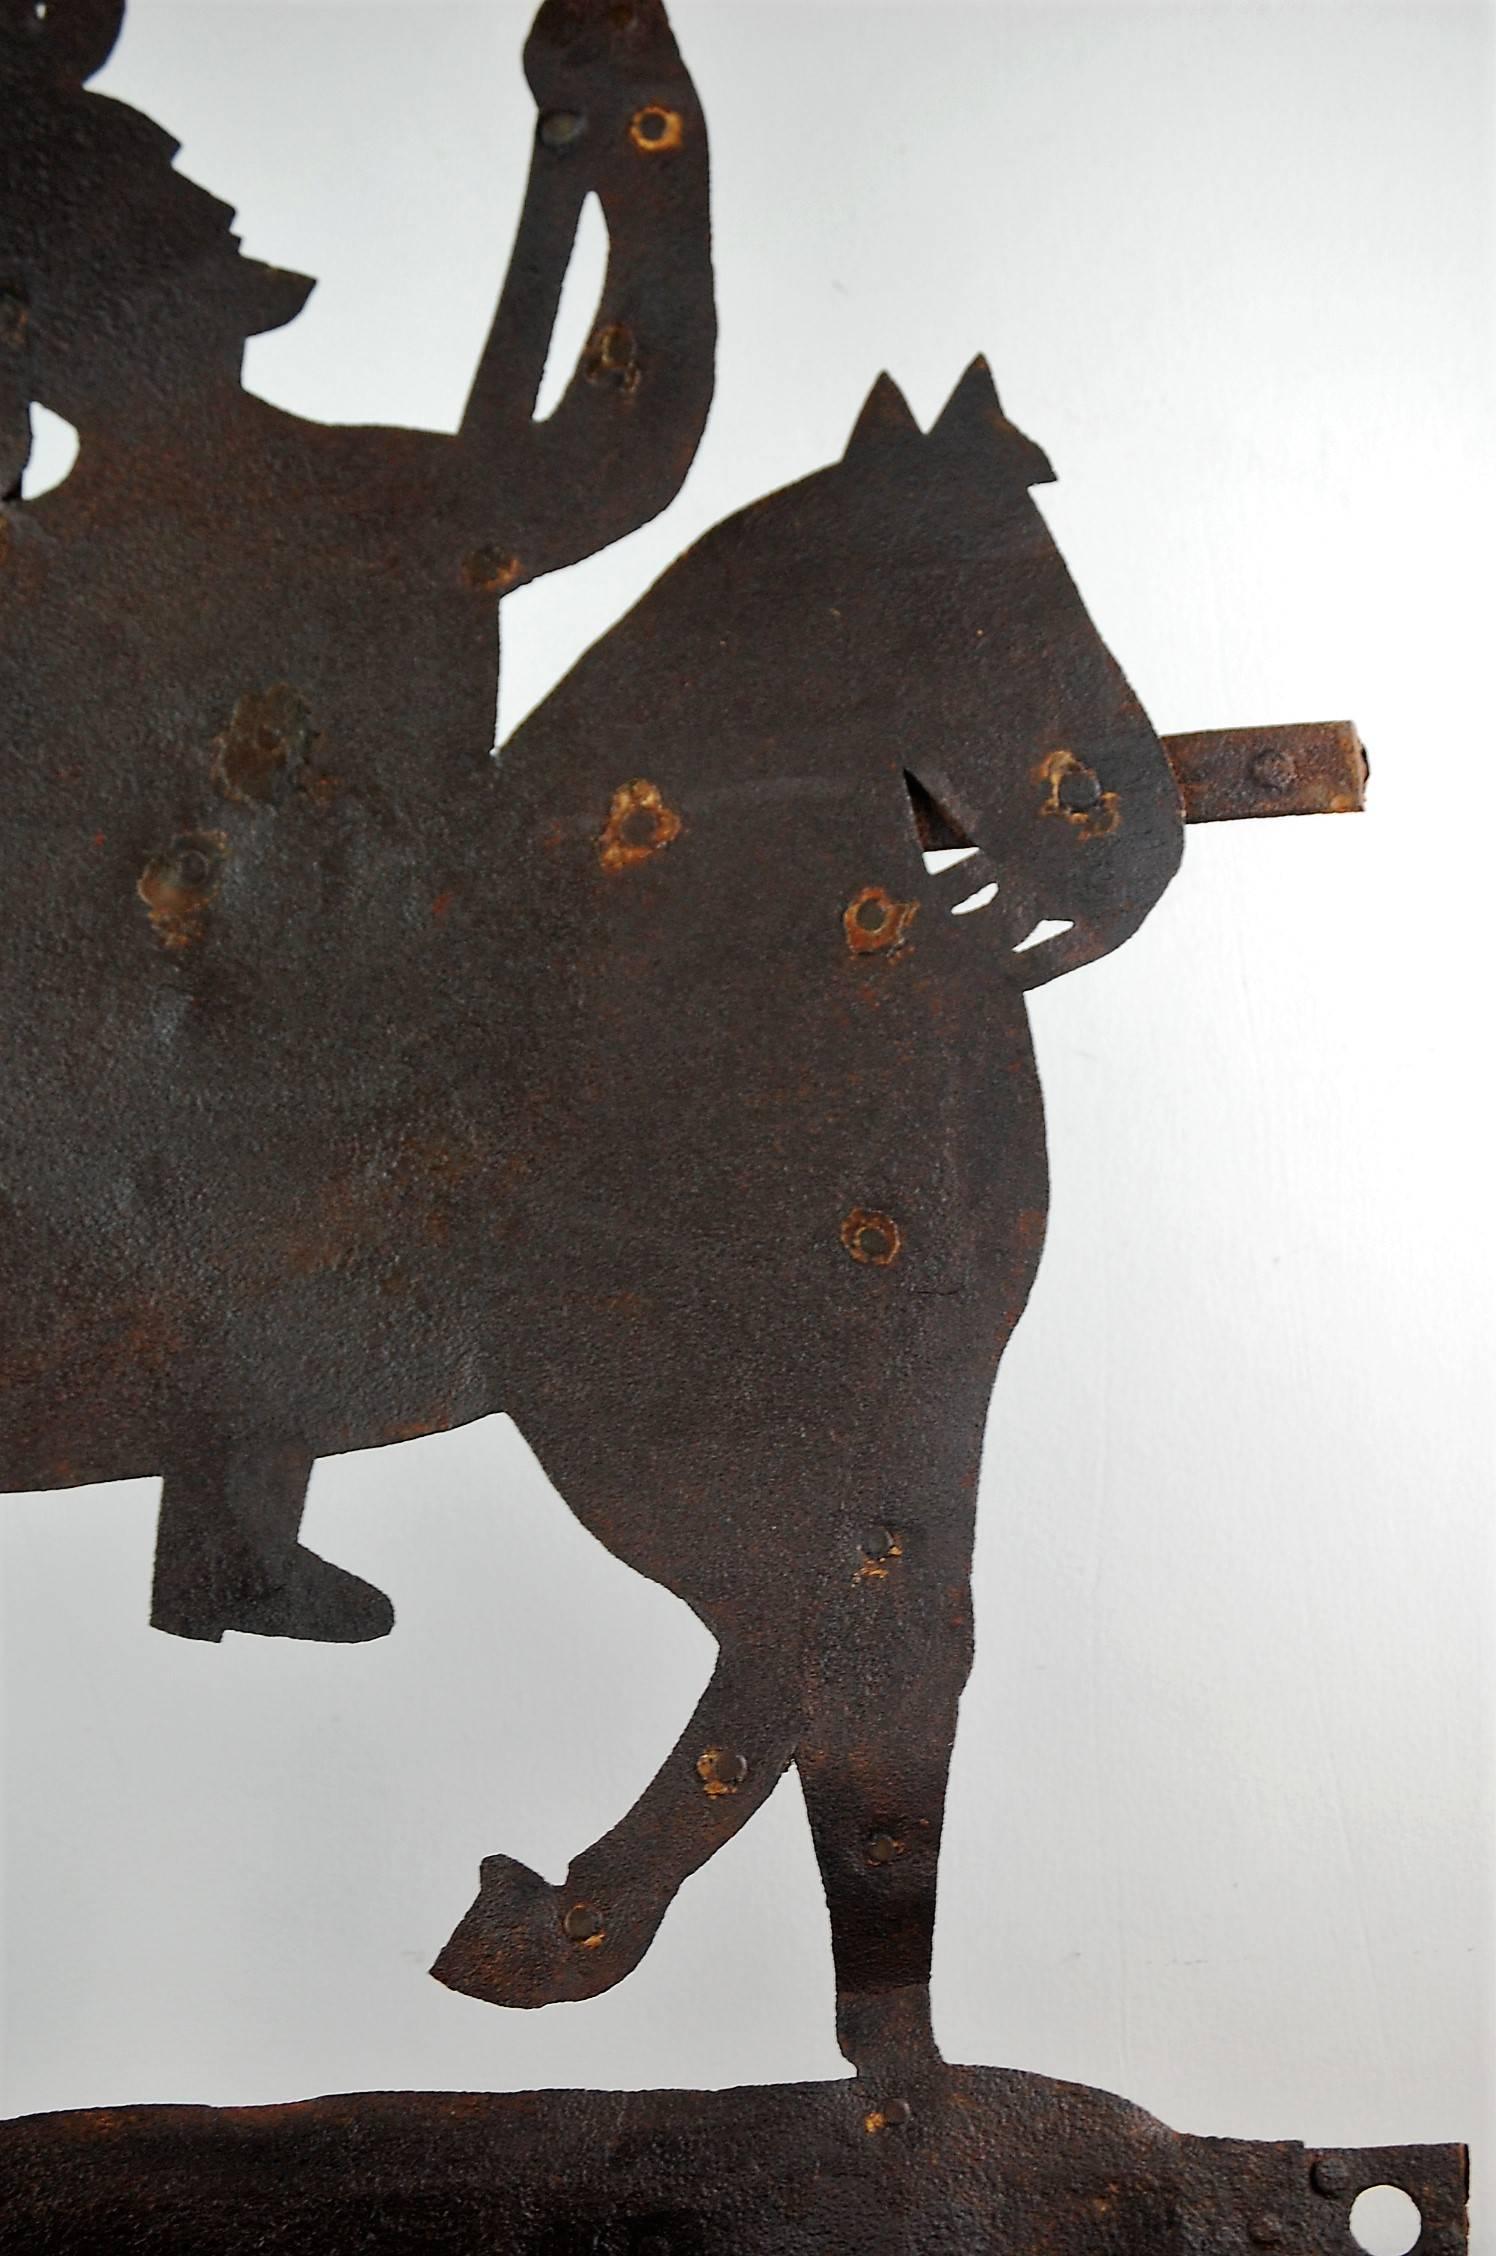 Mid-19th century Silhouette military outfitters trade sign, sheet metal, naïve depiction of the Cavalryman drawing his sword, supporting strap metal to the rear.